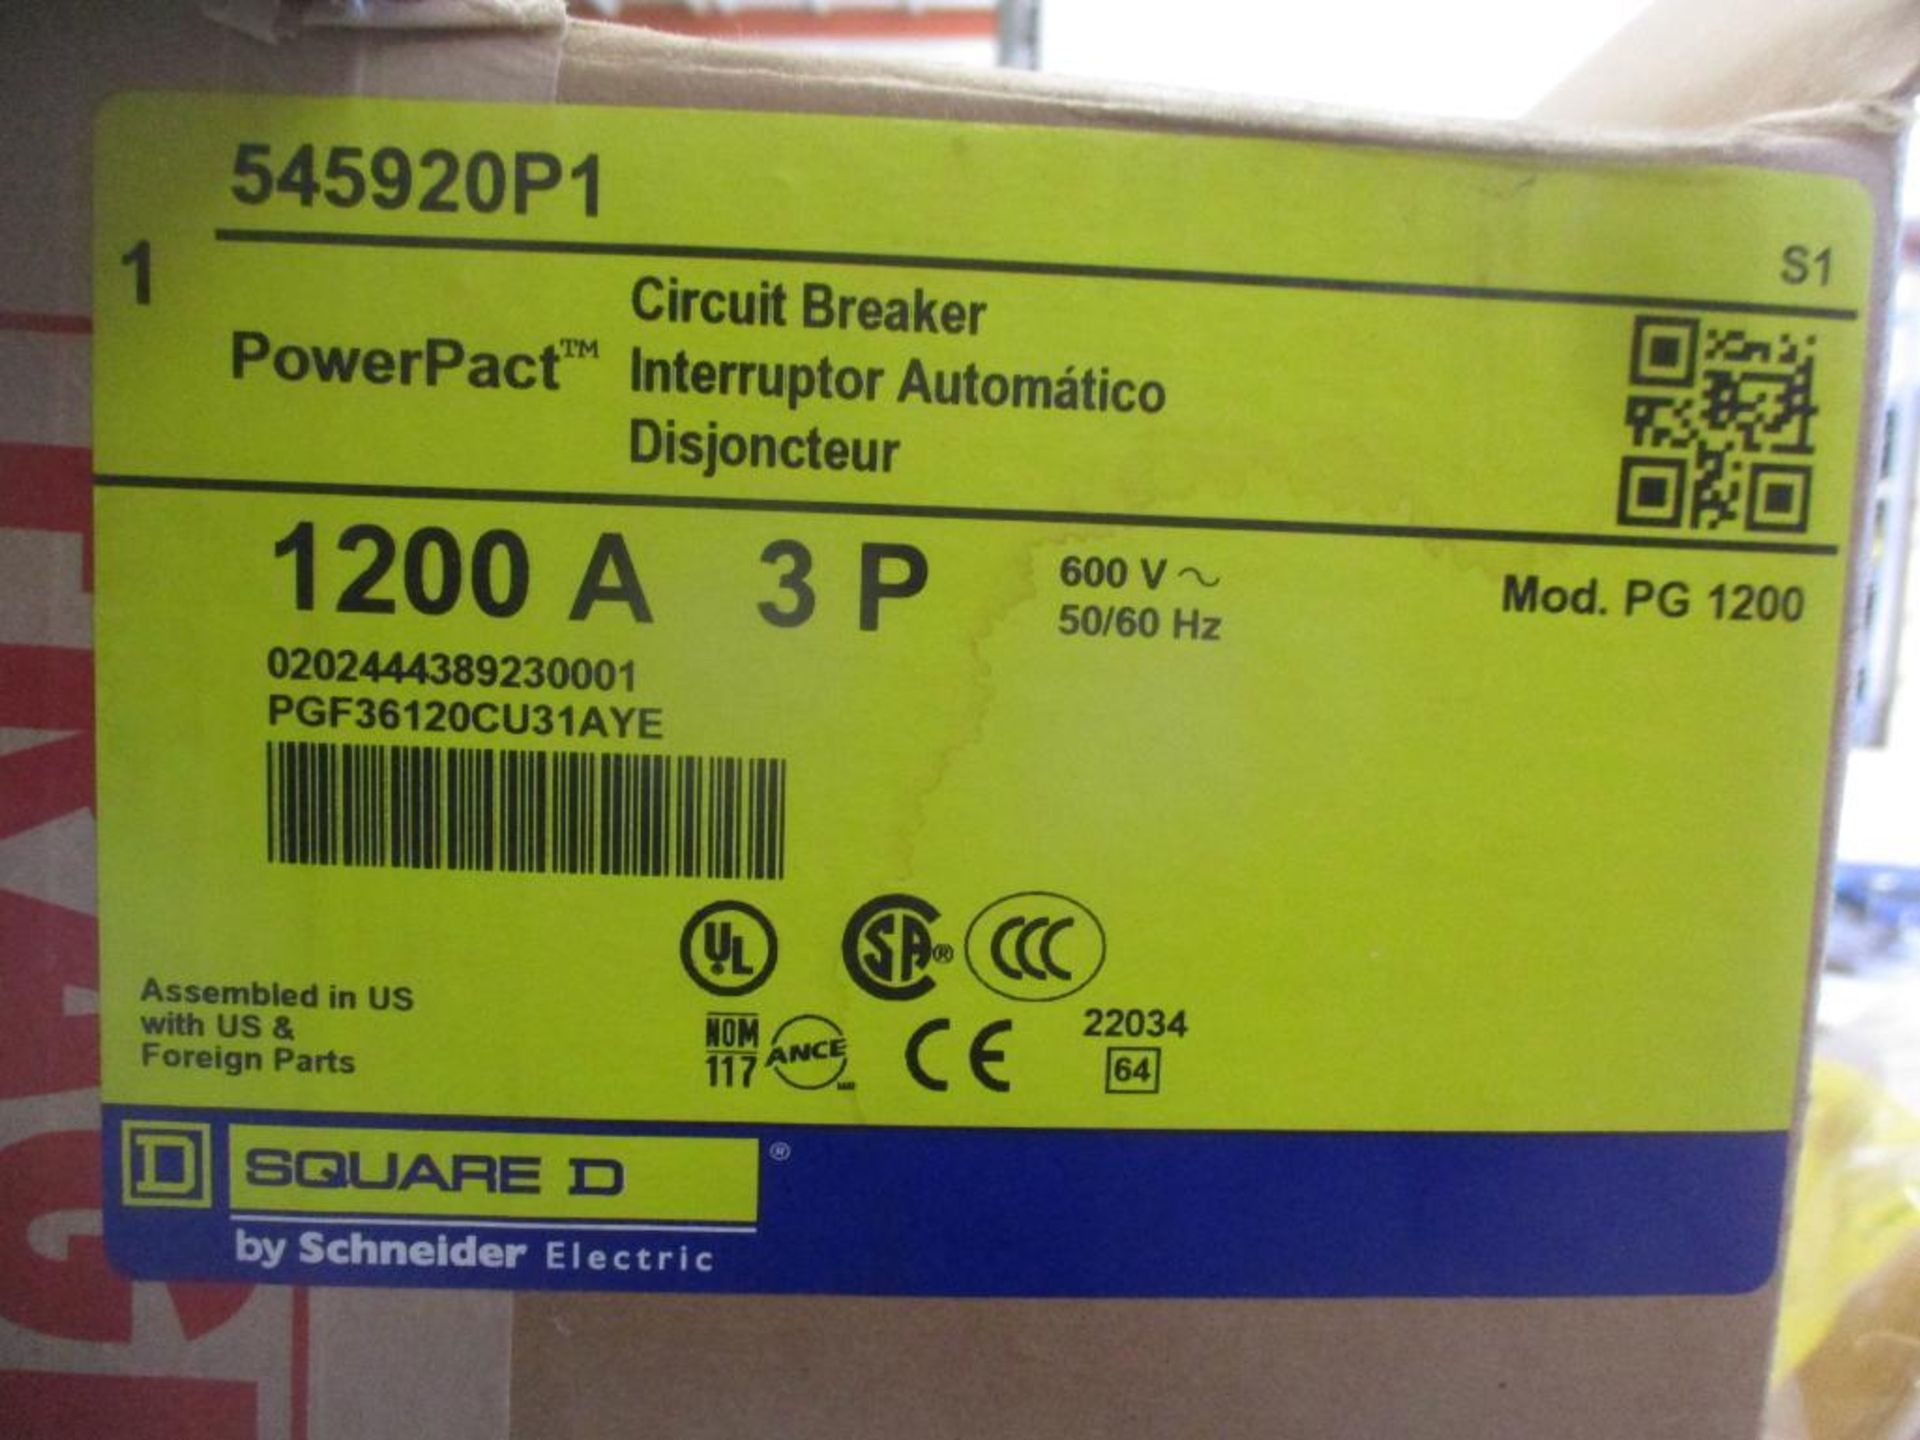 Square D 1200 AMP Circuit Breaker, 545920P1, 1200A,3P, 600VAC, PowerPacT PG 1200 (New in Box) - Image 4 of 5